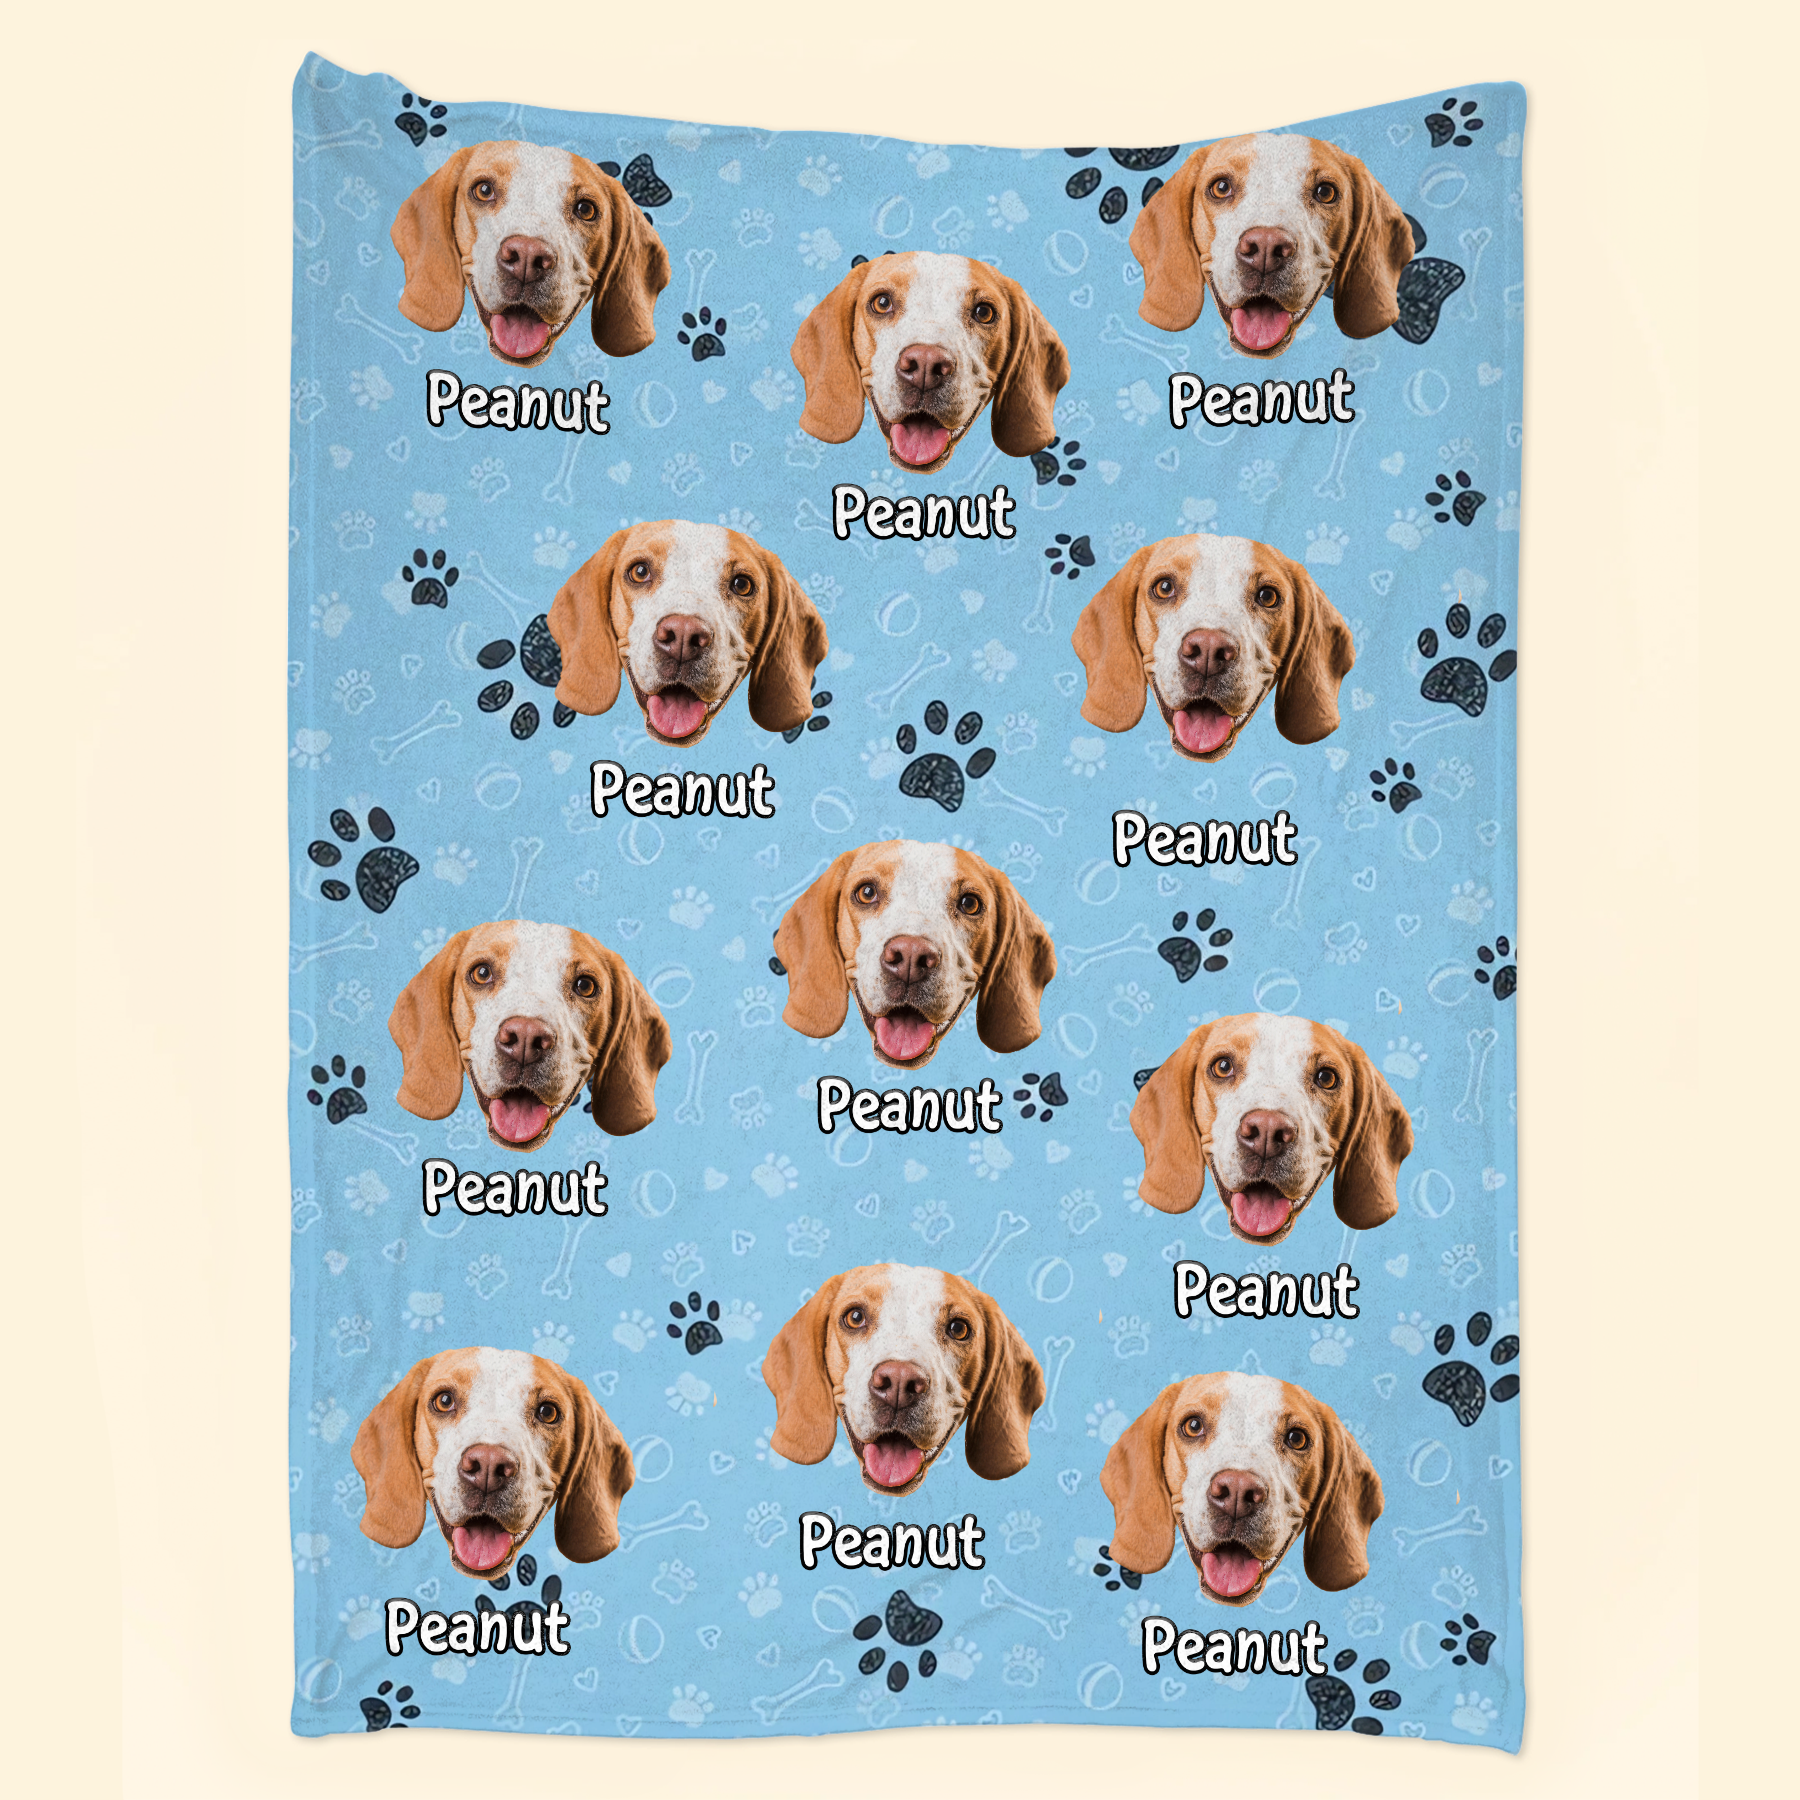 My Furrybaby -  Personalized Custom Blanket - Christmas Gift For Pet Lover